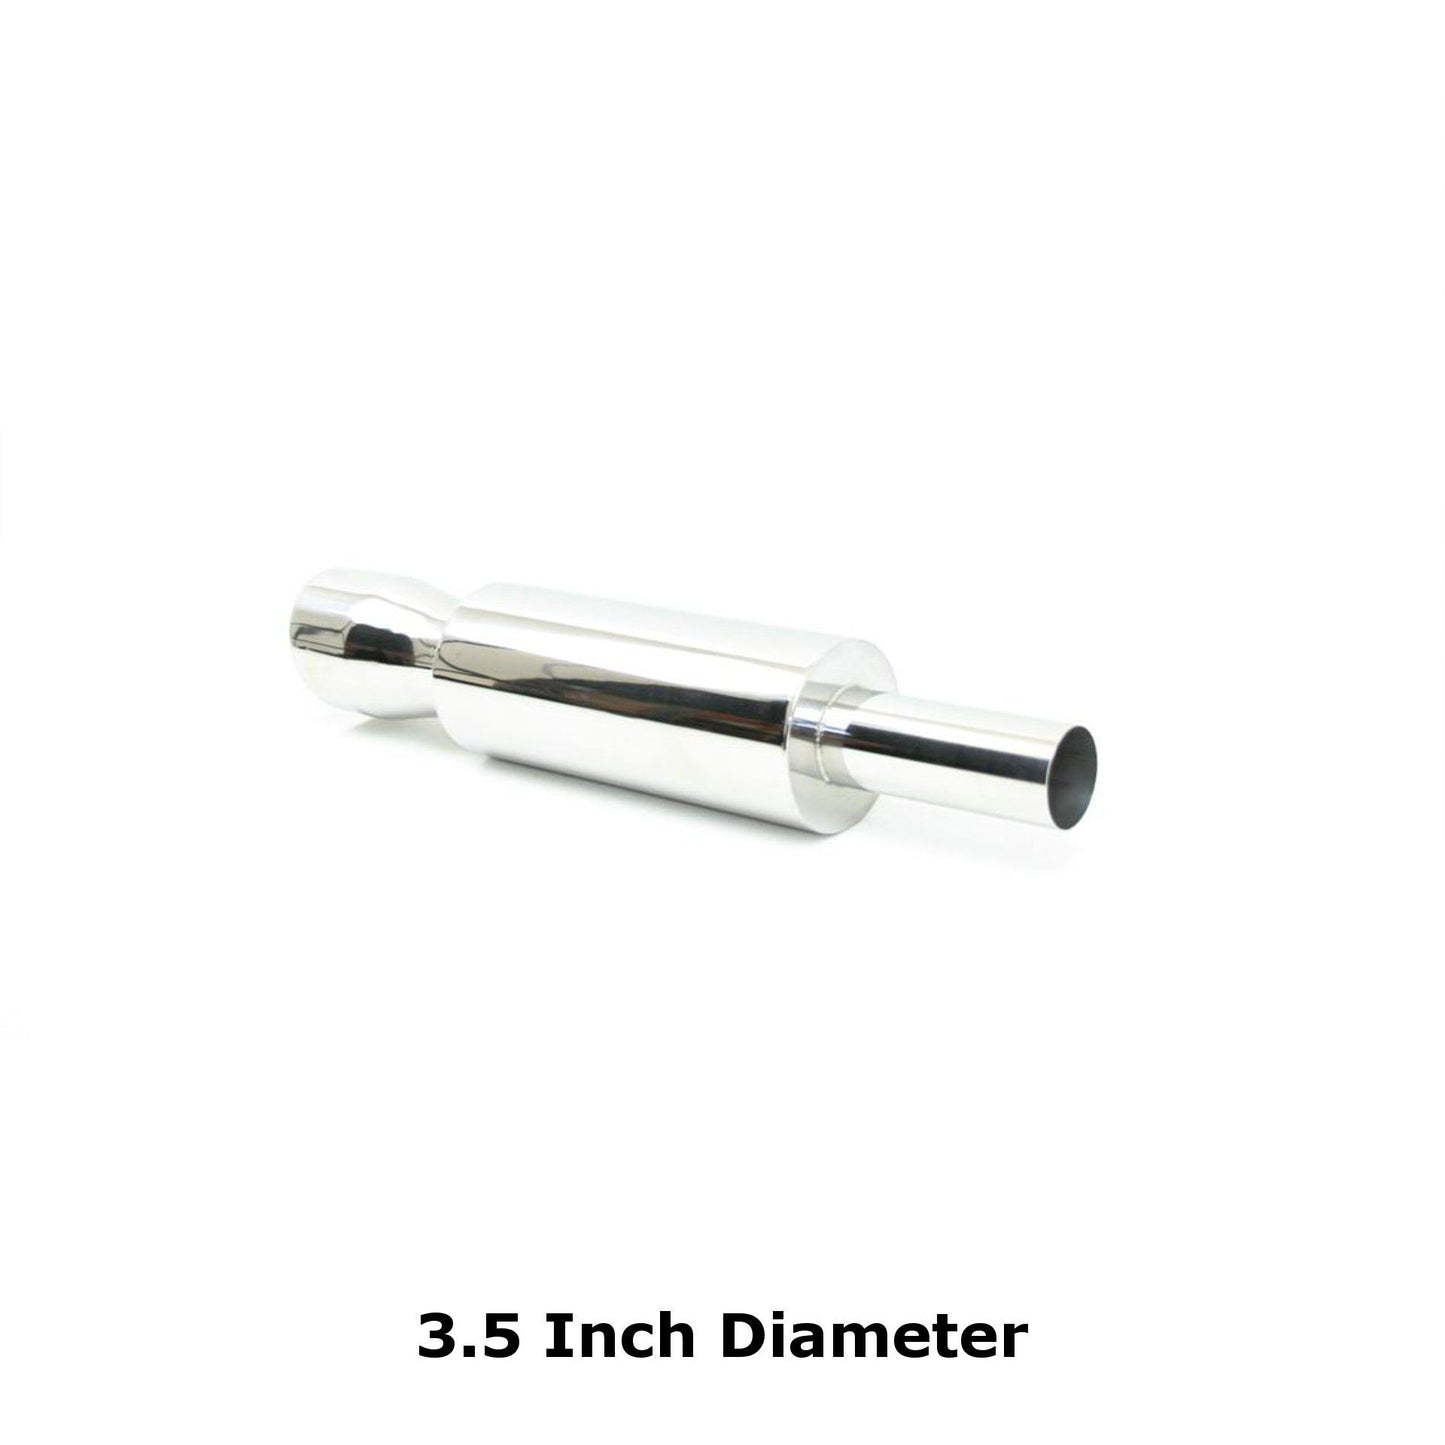 3.5 Inch Diameter Stainless Steel Long Exhaust Tip Silencer -  - sold by Direct4x4